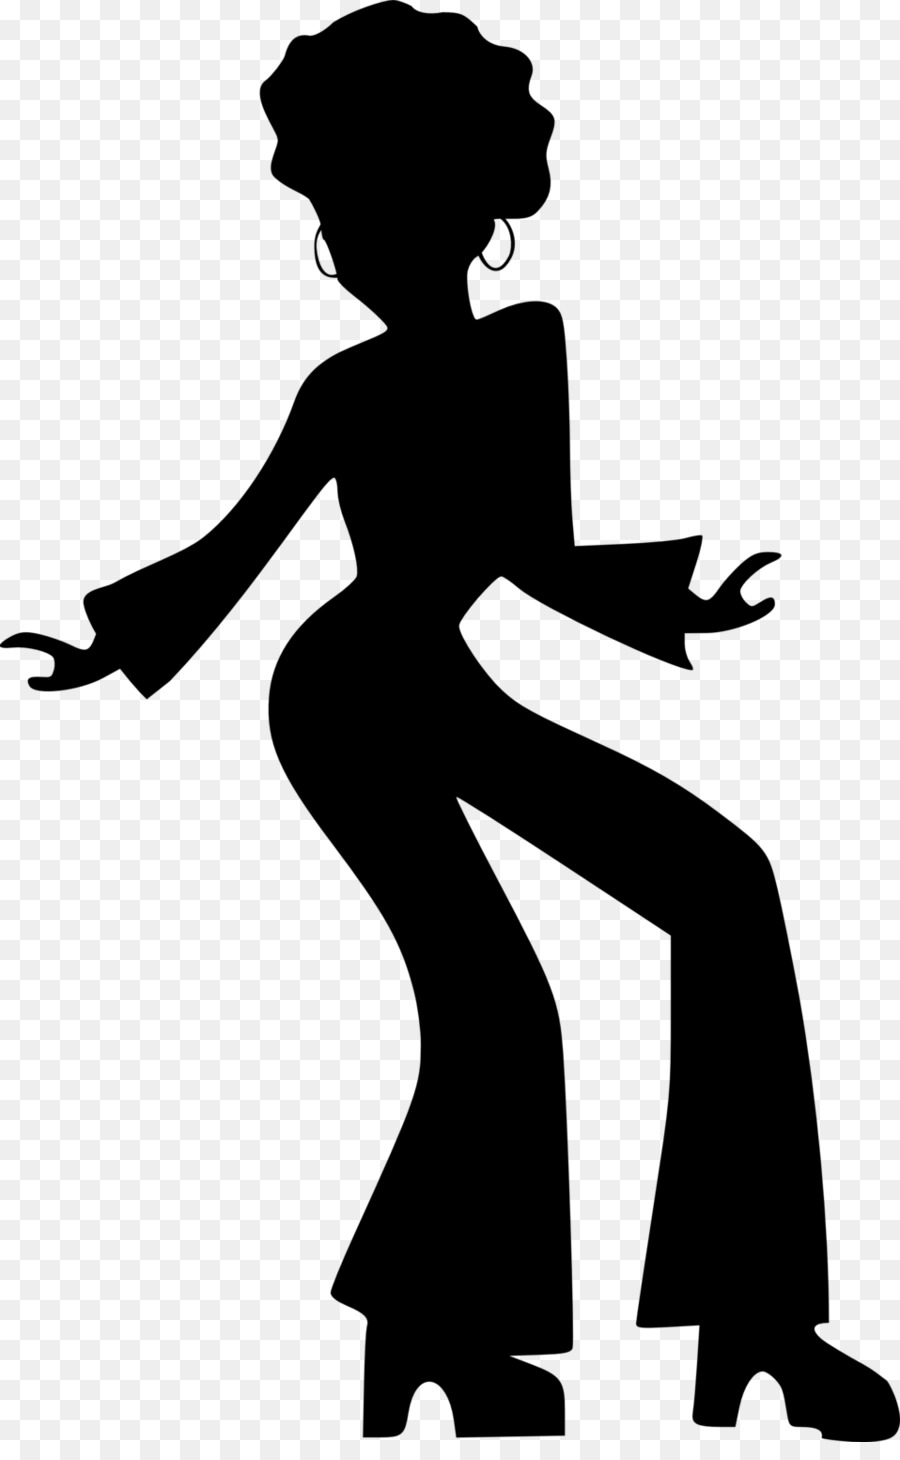 Disco Dance Drawing Silhouette Clip art - Silhouette png download - 958*1535 - Free Transparent  png Download.